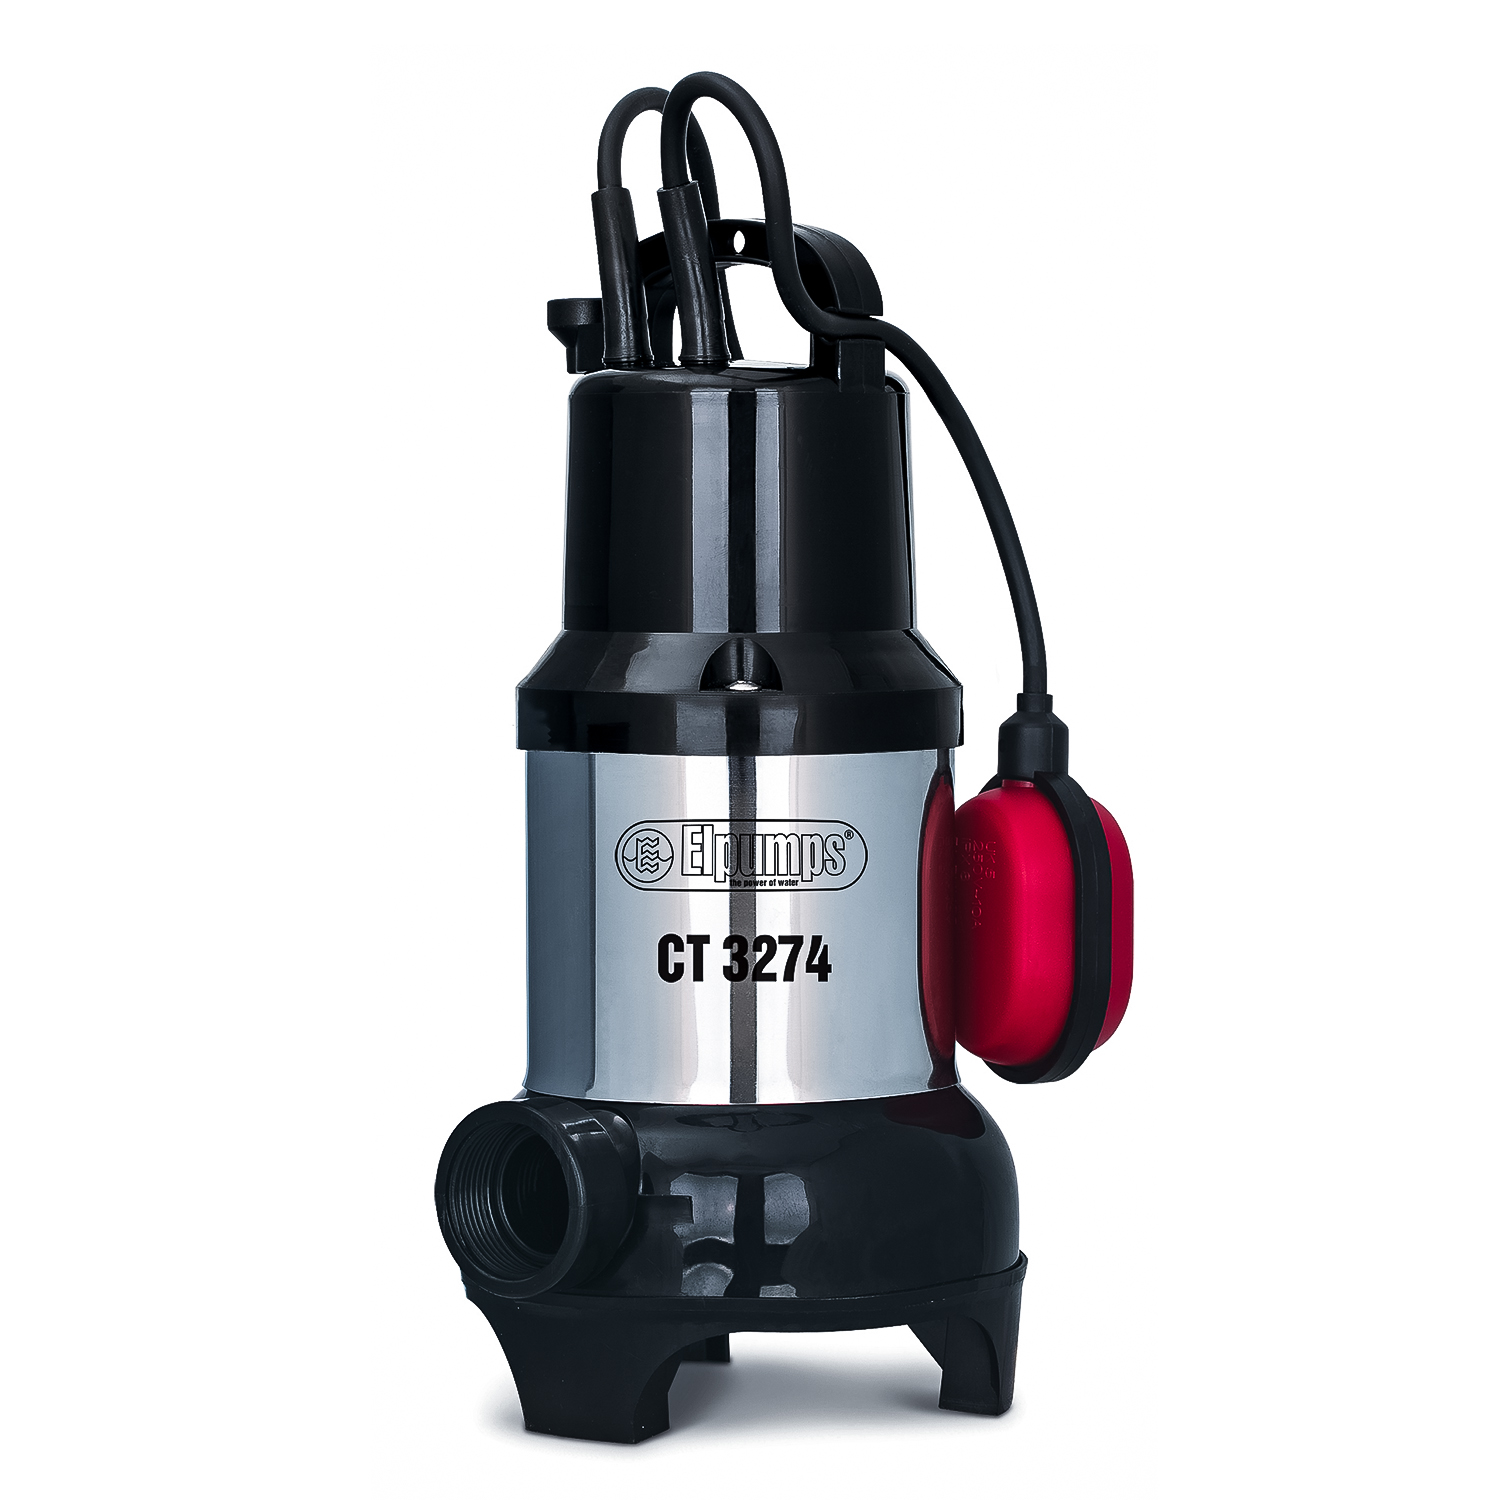 CT 3274 Submersible pumps for sewage